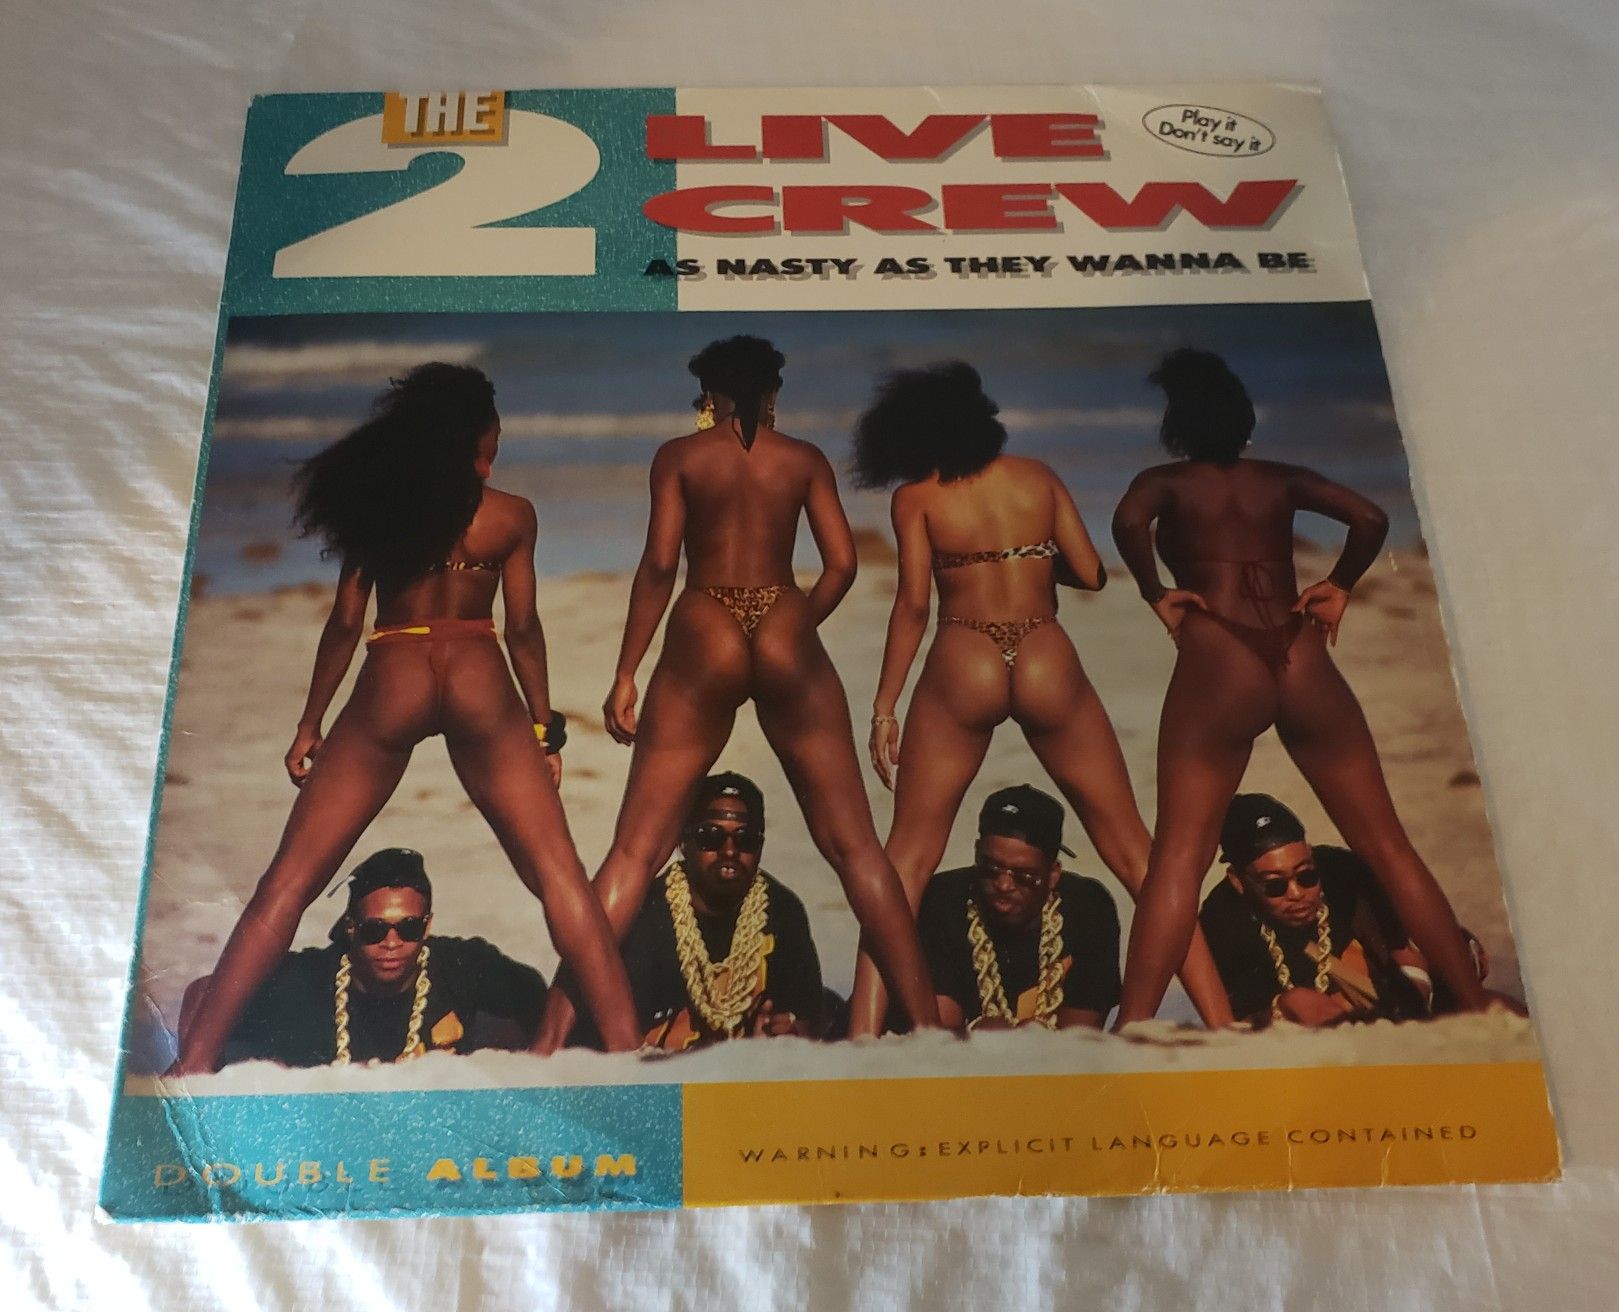 2 Live Crew (2×LP) Vinyl - As nasty as they wanna be